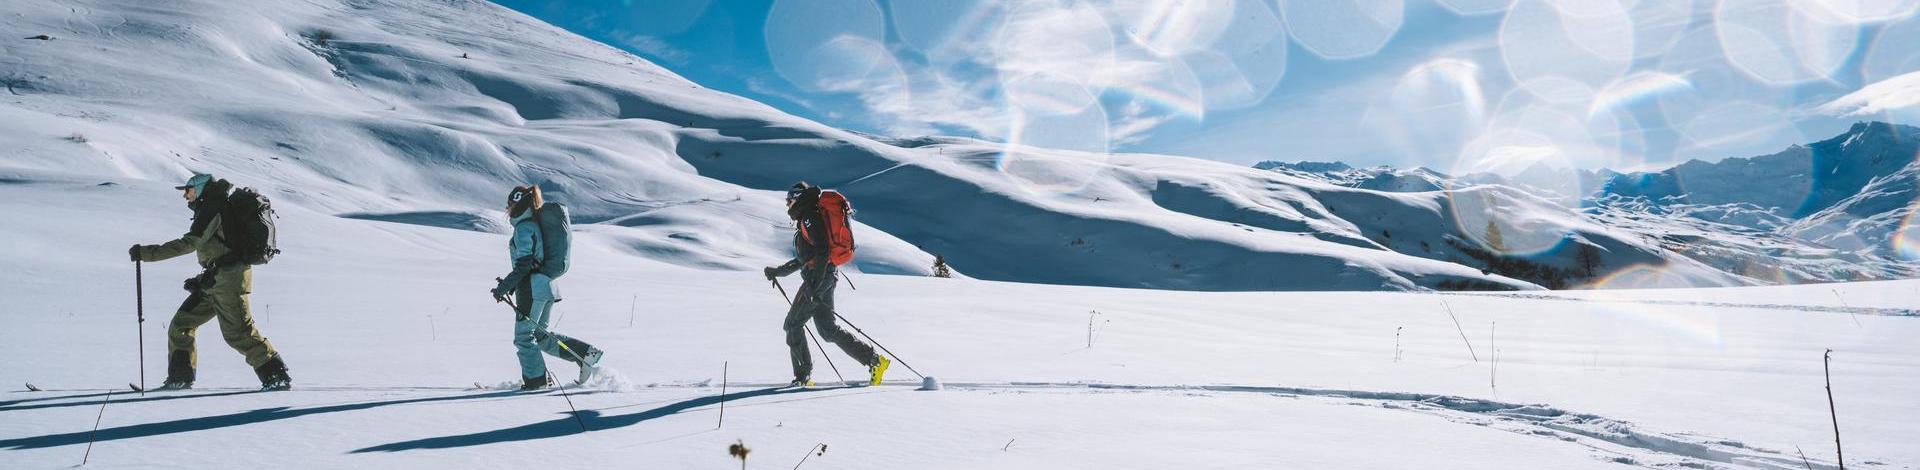 Ski touring with friends in the 3 Valleys